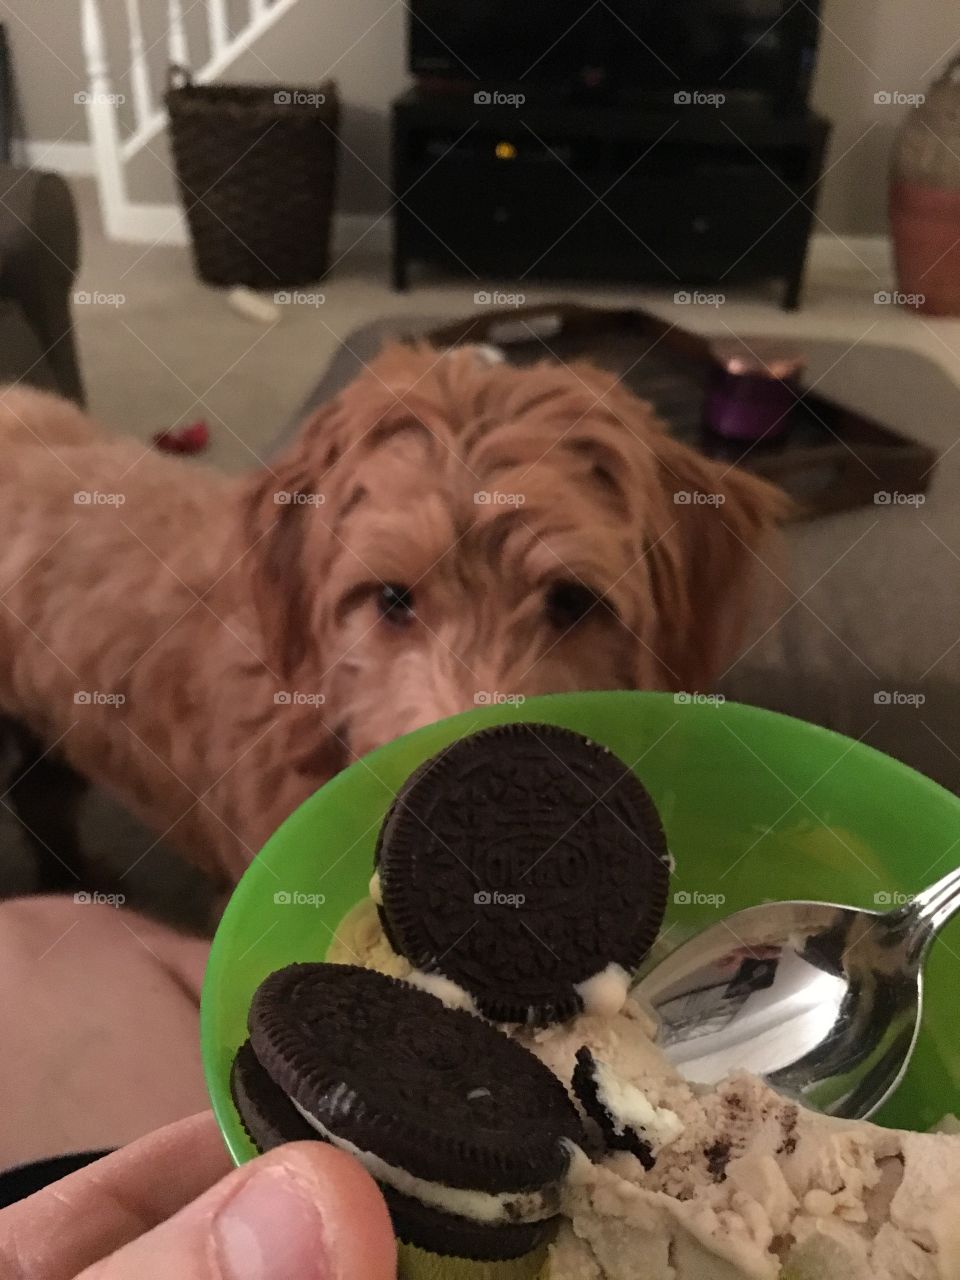 Nobody can resist the flavor of an Oreo!